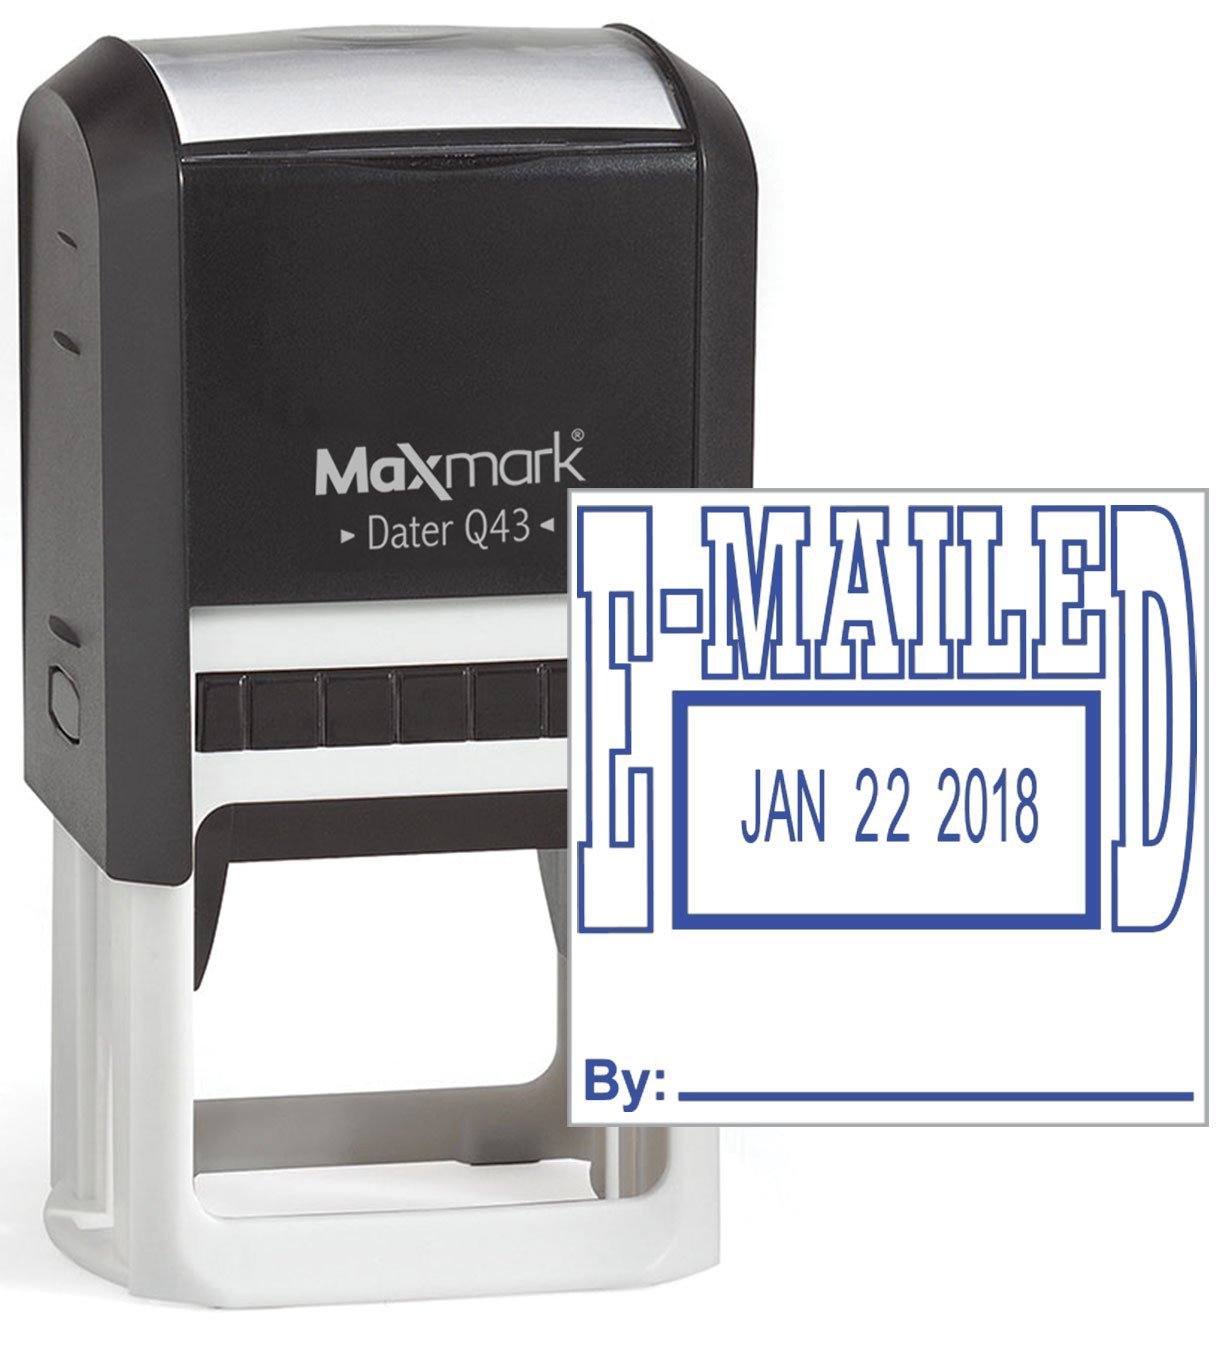 MaxMark Q43 (Large Size) Date Stamp with "E-MAILED" Self Inking Stamp - Blue Ink